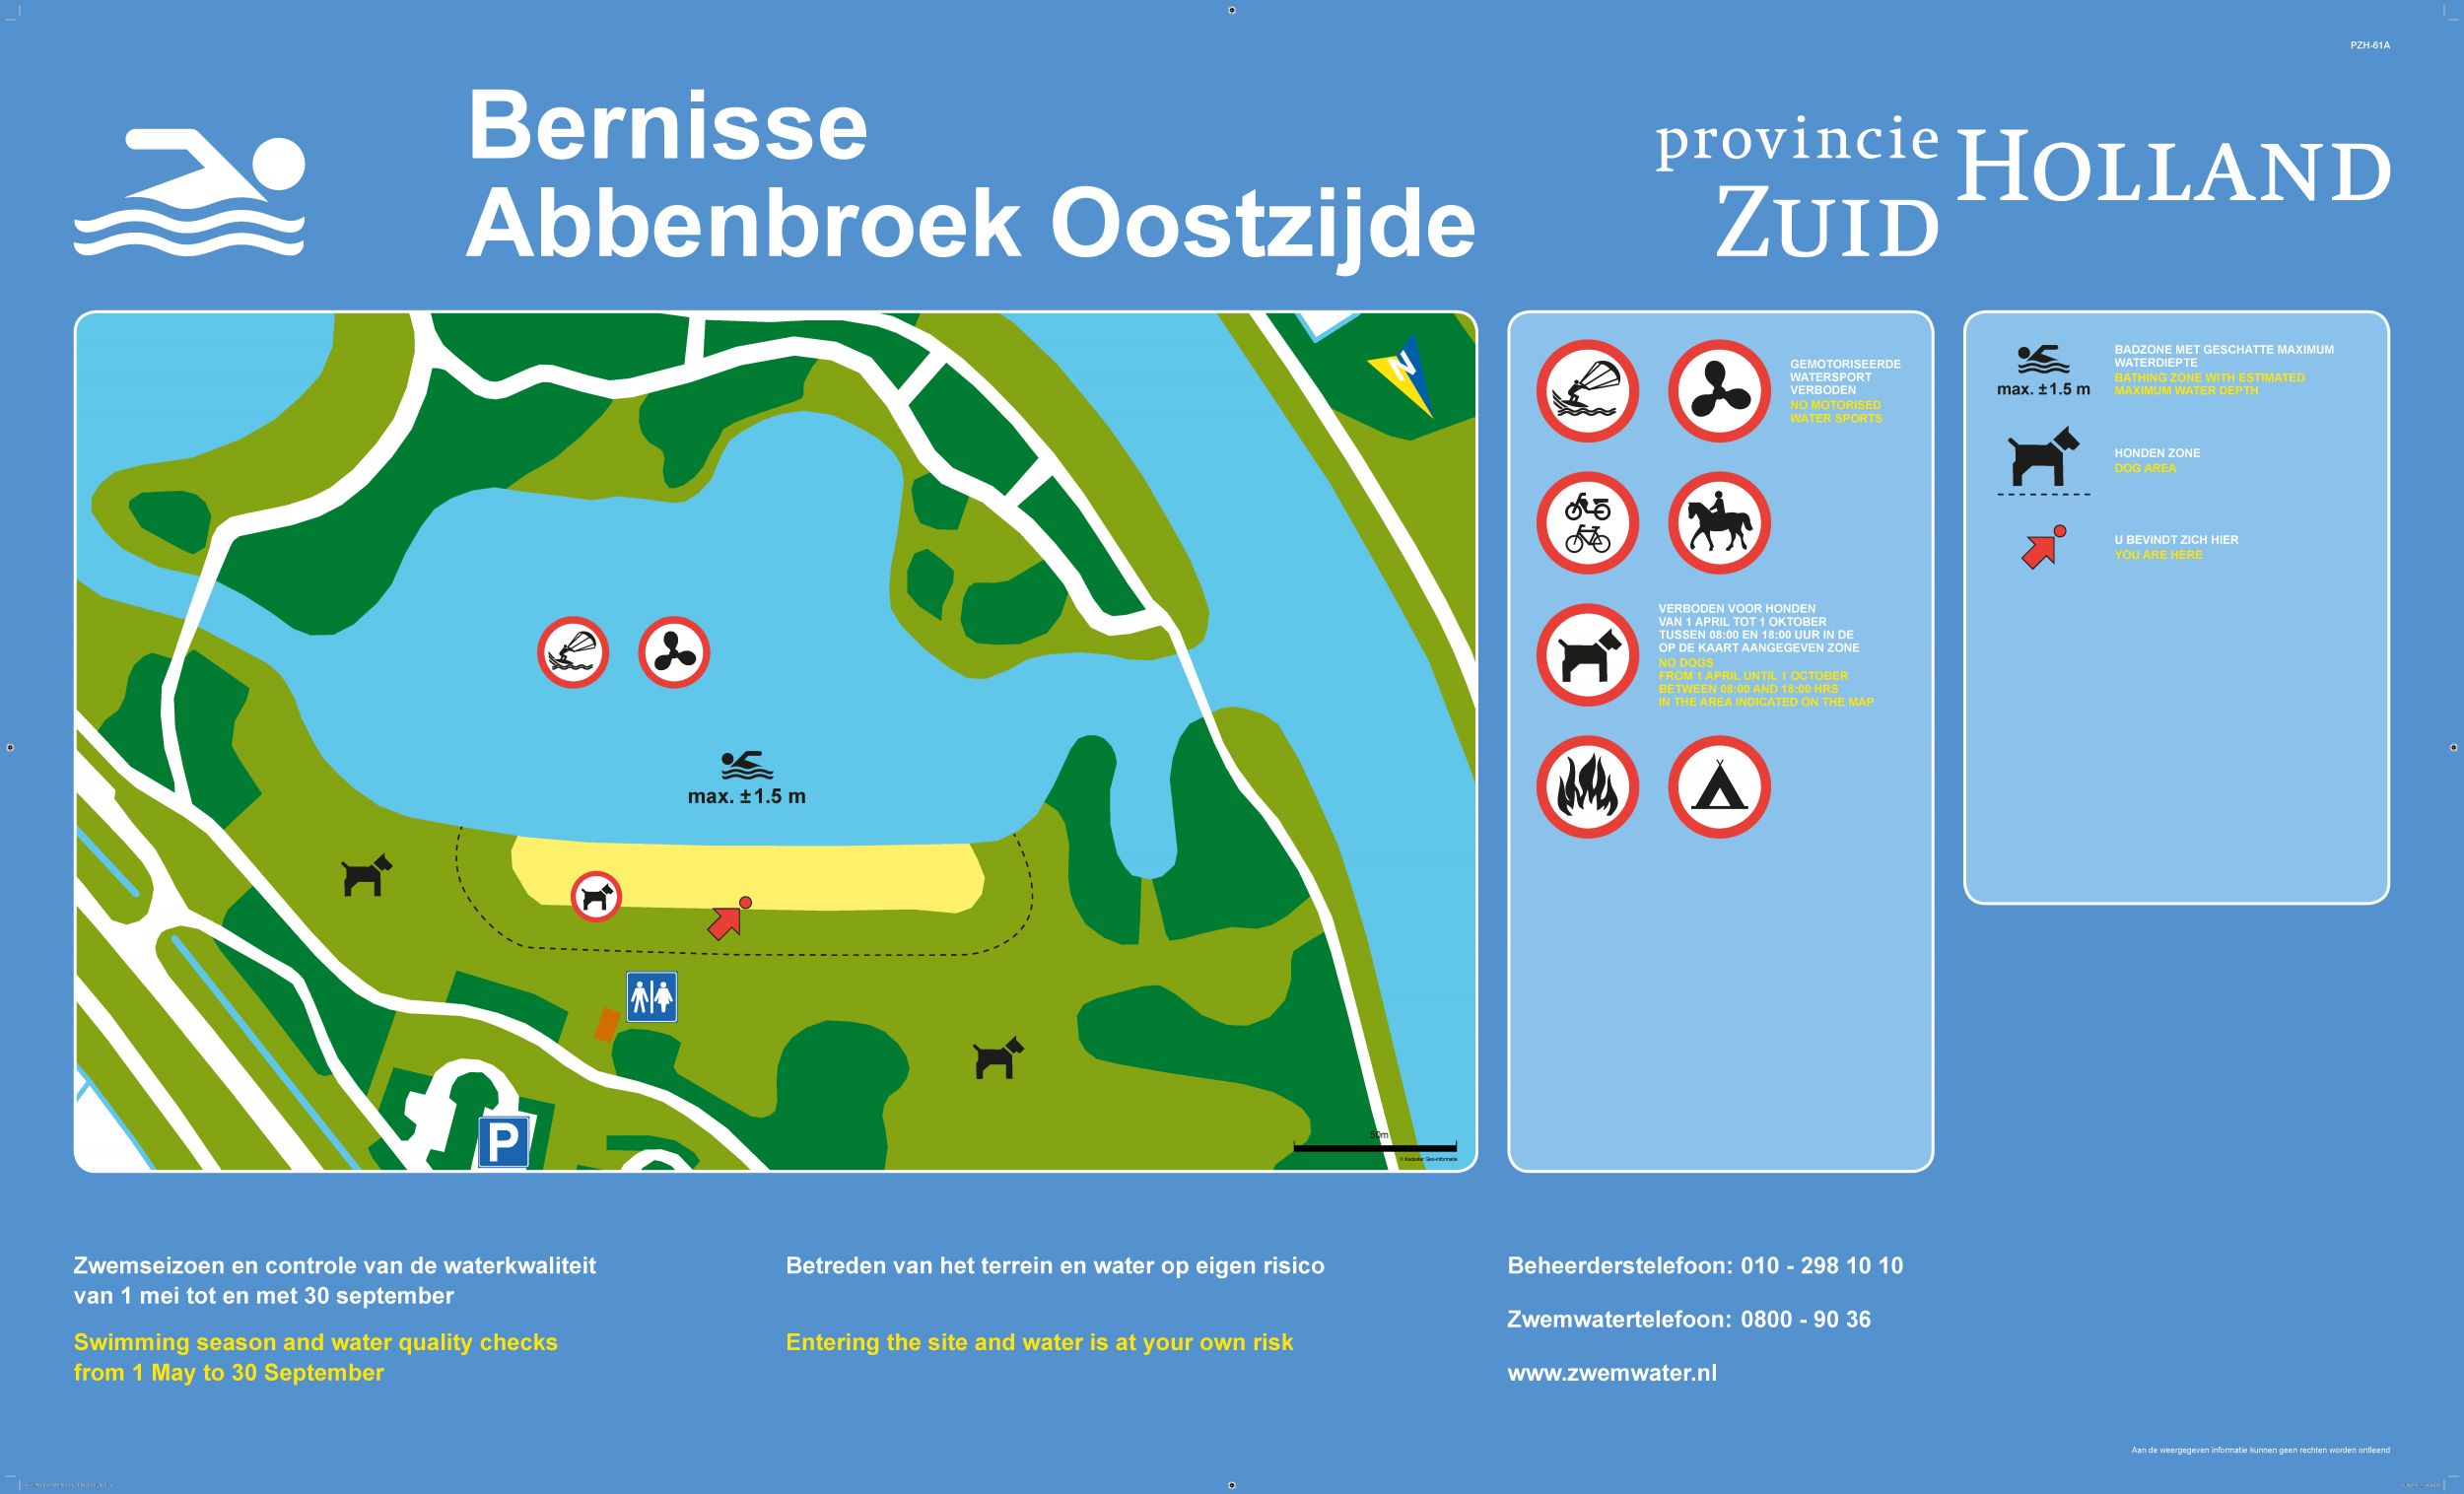 The information board at the swimming location Bernisse Abbenbroek Oostzijde